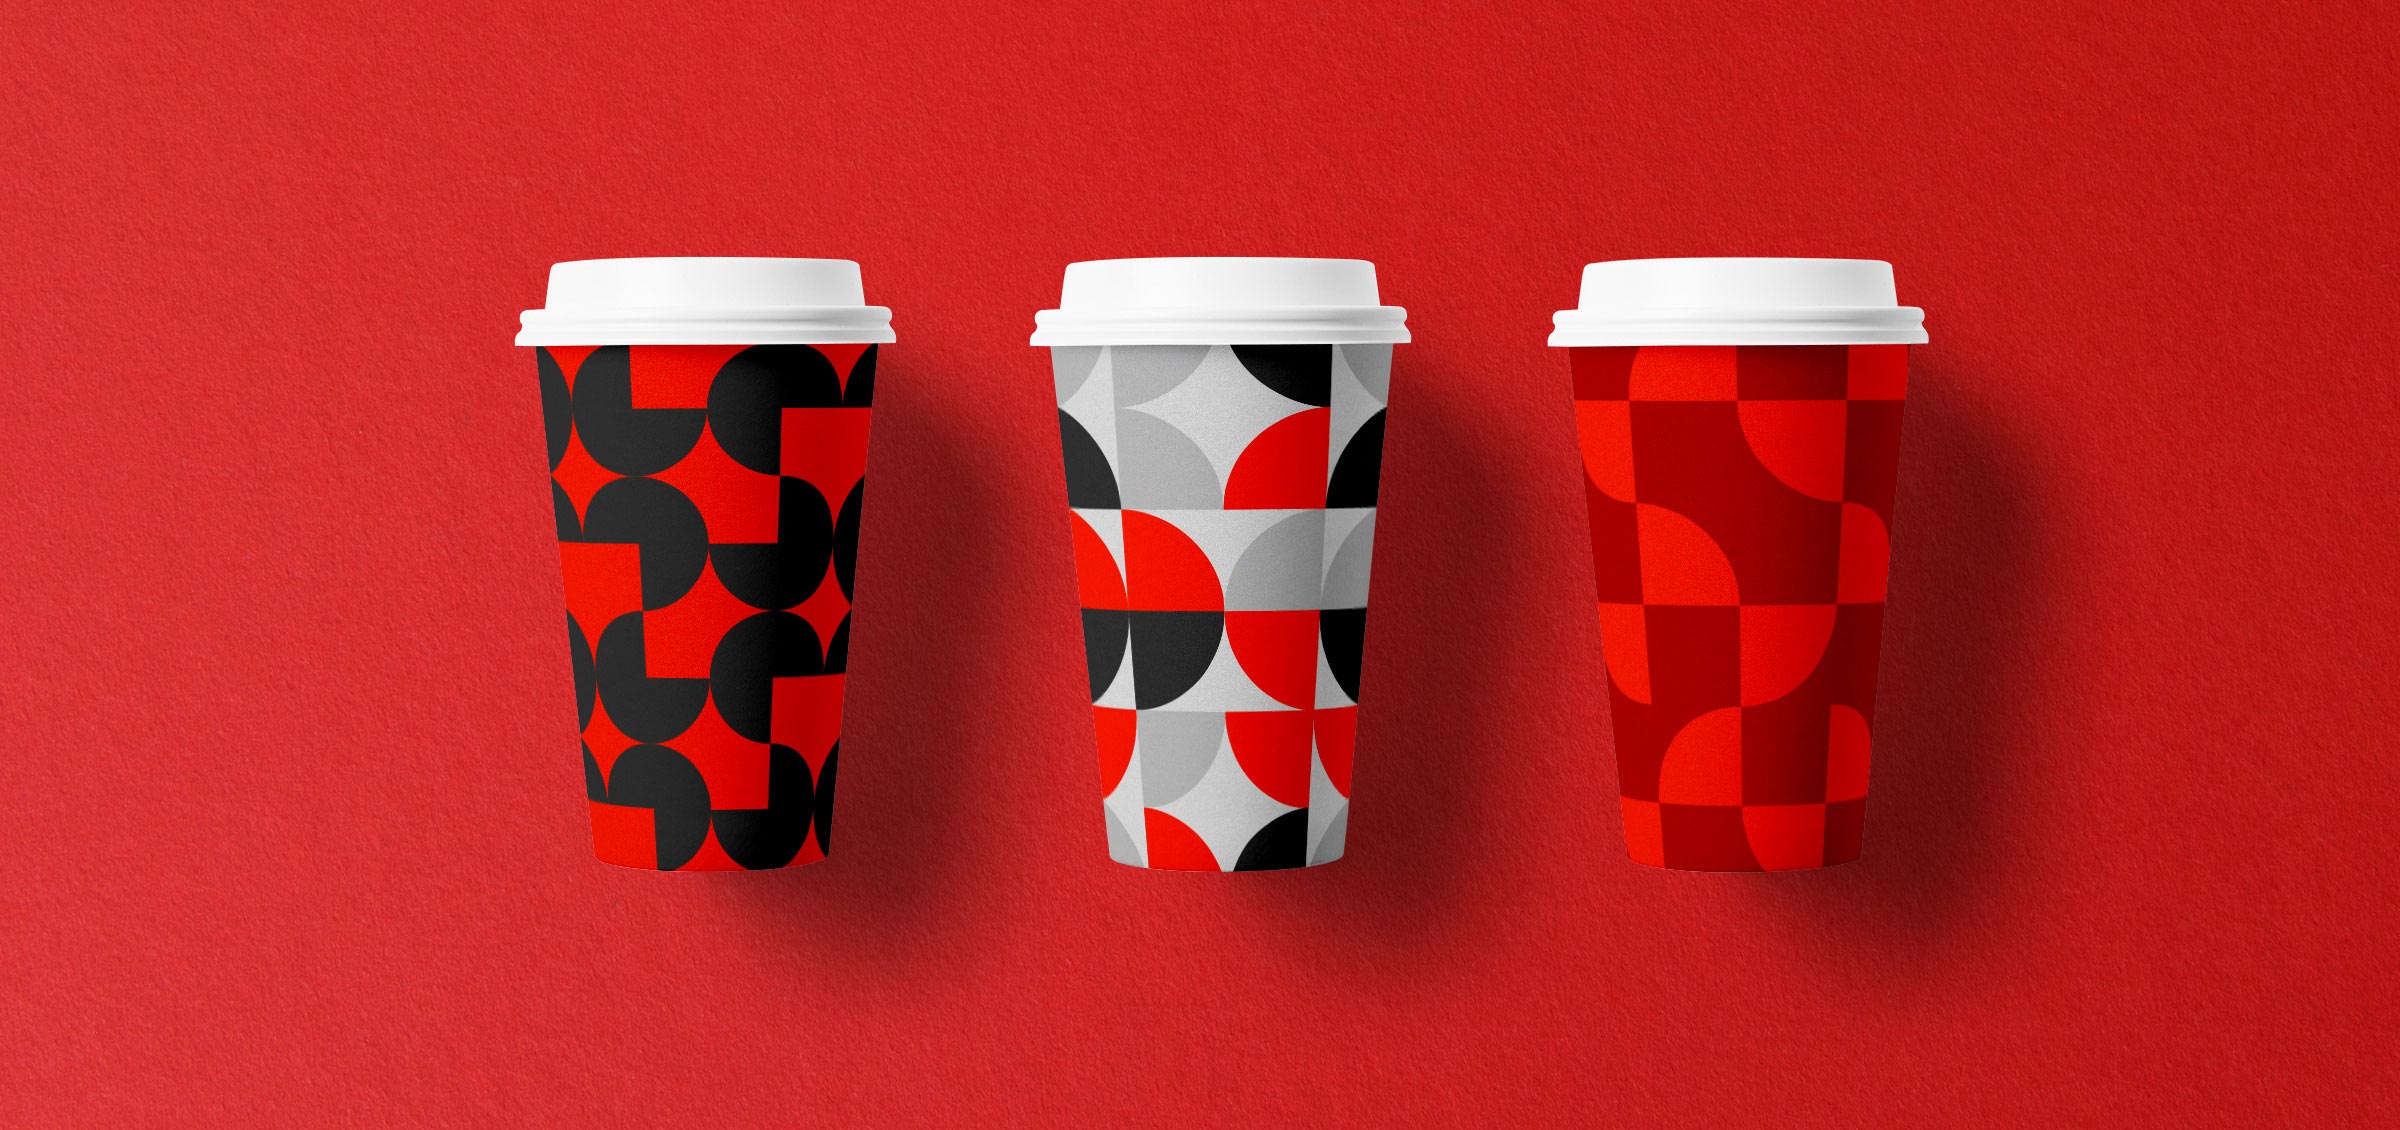 3 coffee cup designs with soren west patterns in red, black and gray on red